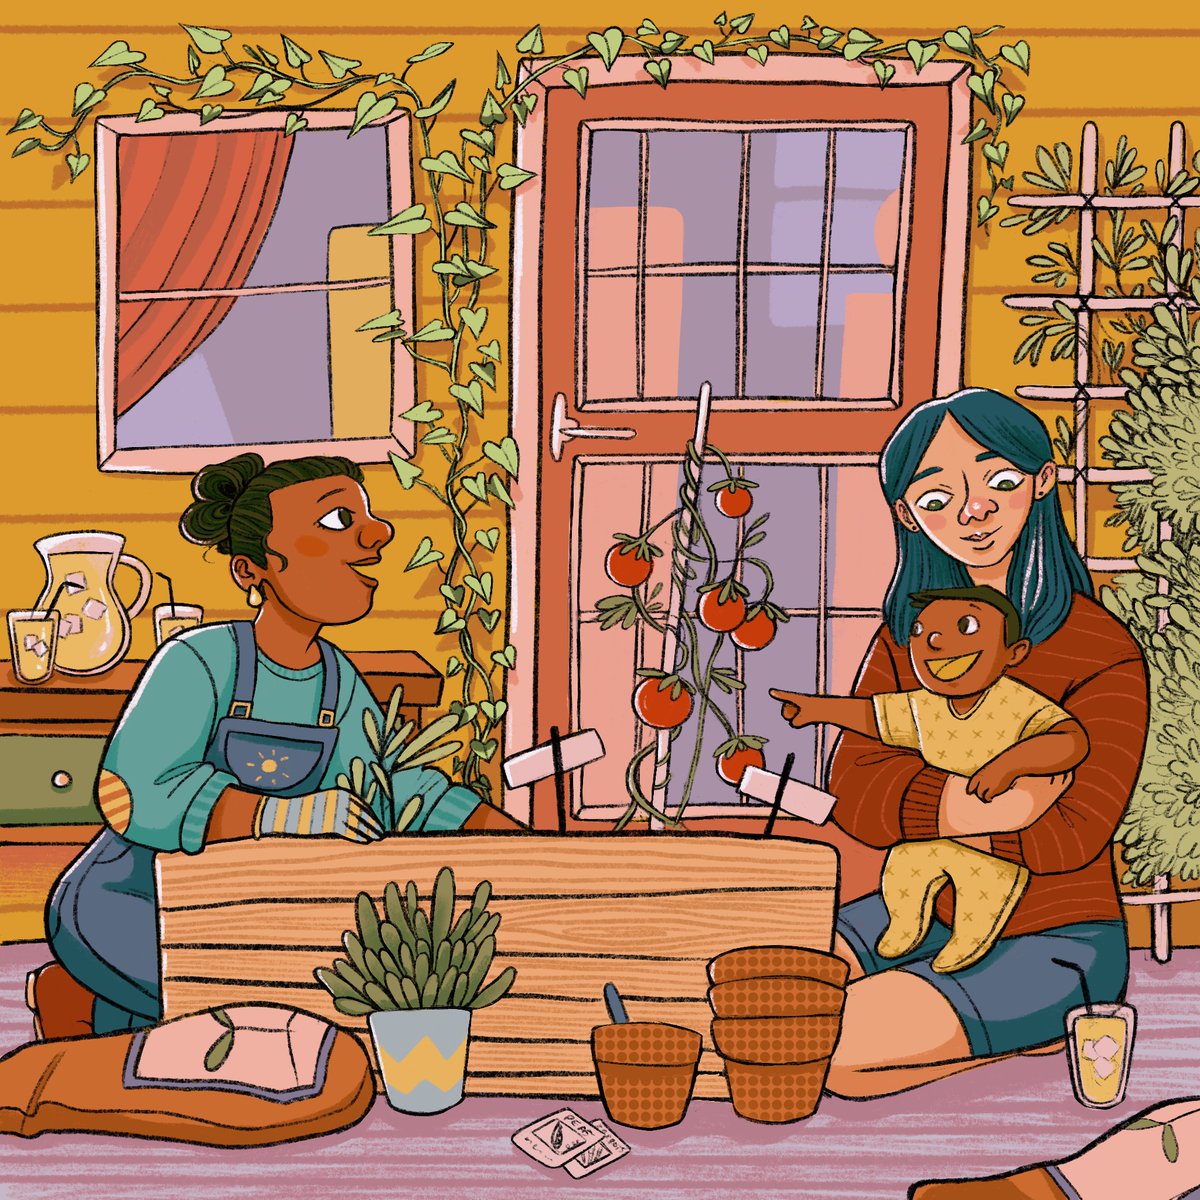 This is... already kinda getting more likes & shares than expected soooo hello! My name is Elliott, I'm a trans illustrator in kidlit & I'm open for picture book & middlegrade projects! I LOVE drawing cute families, magic, & kids having fun!
☀️ Portfolio: elliottgrinnell.com